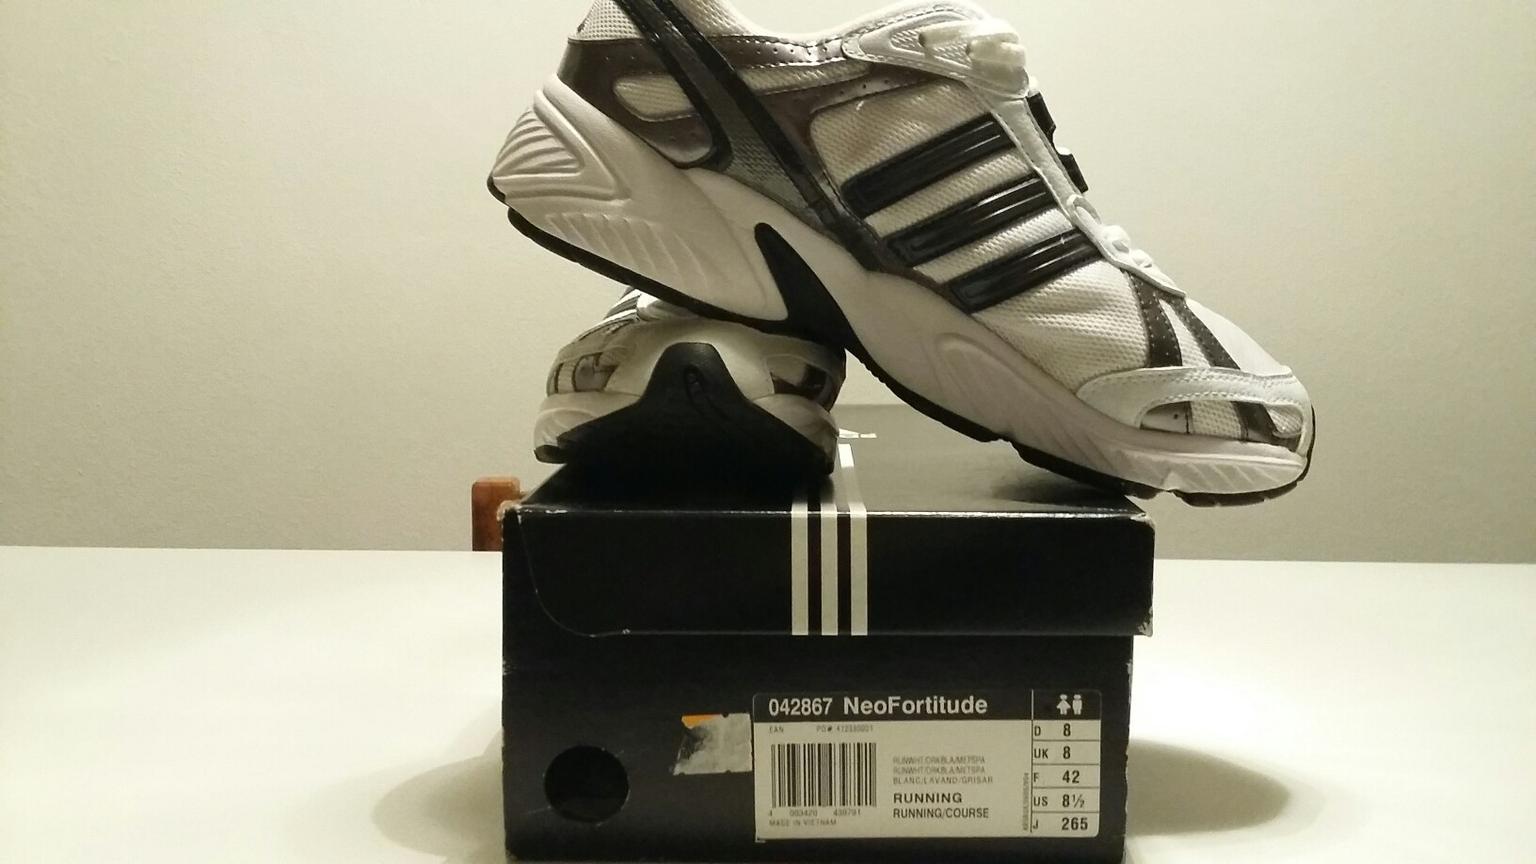 Adidas Scarpe Running USATE in 56025 Pontedera for €30.00 for sale | Shpock